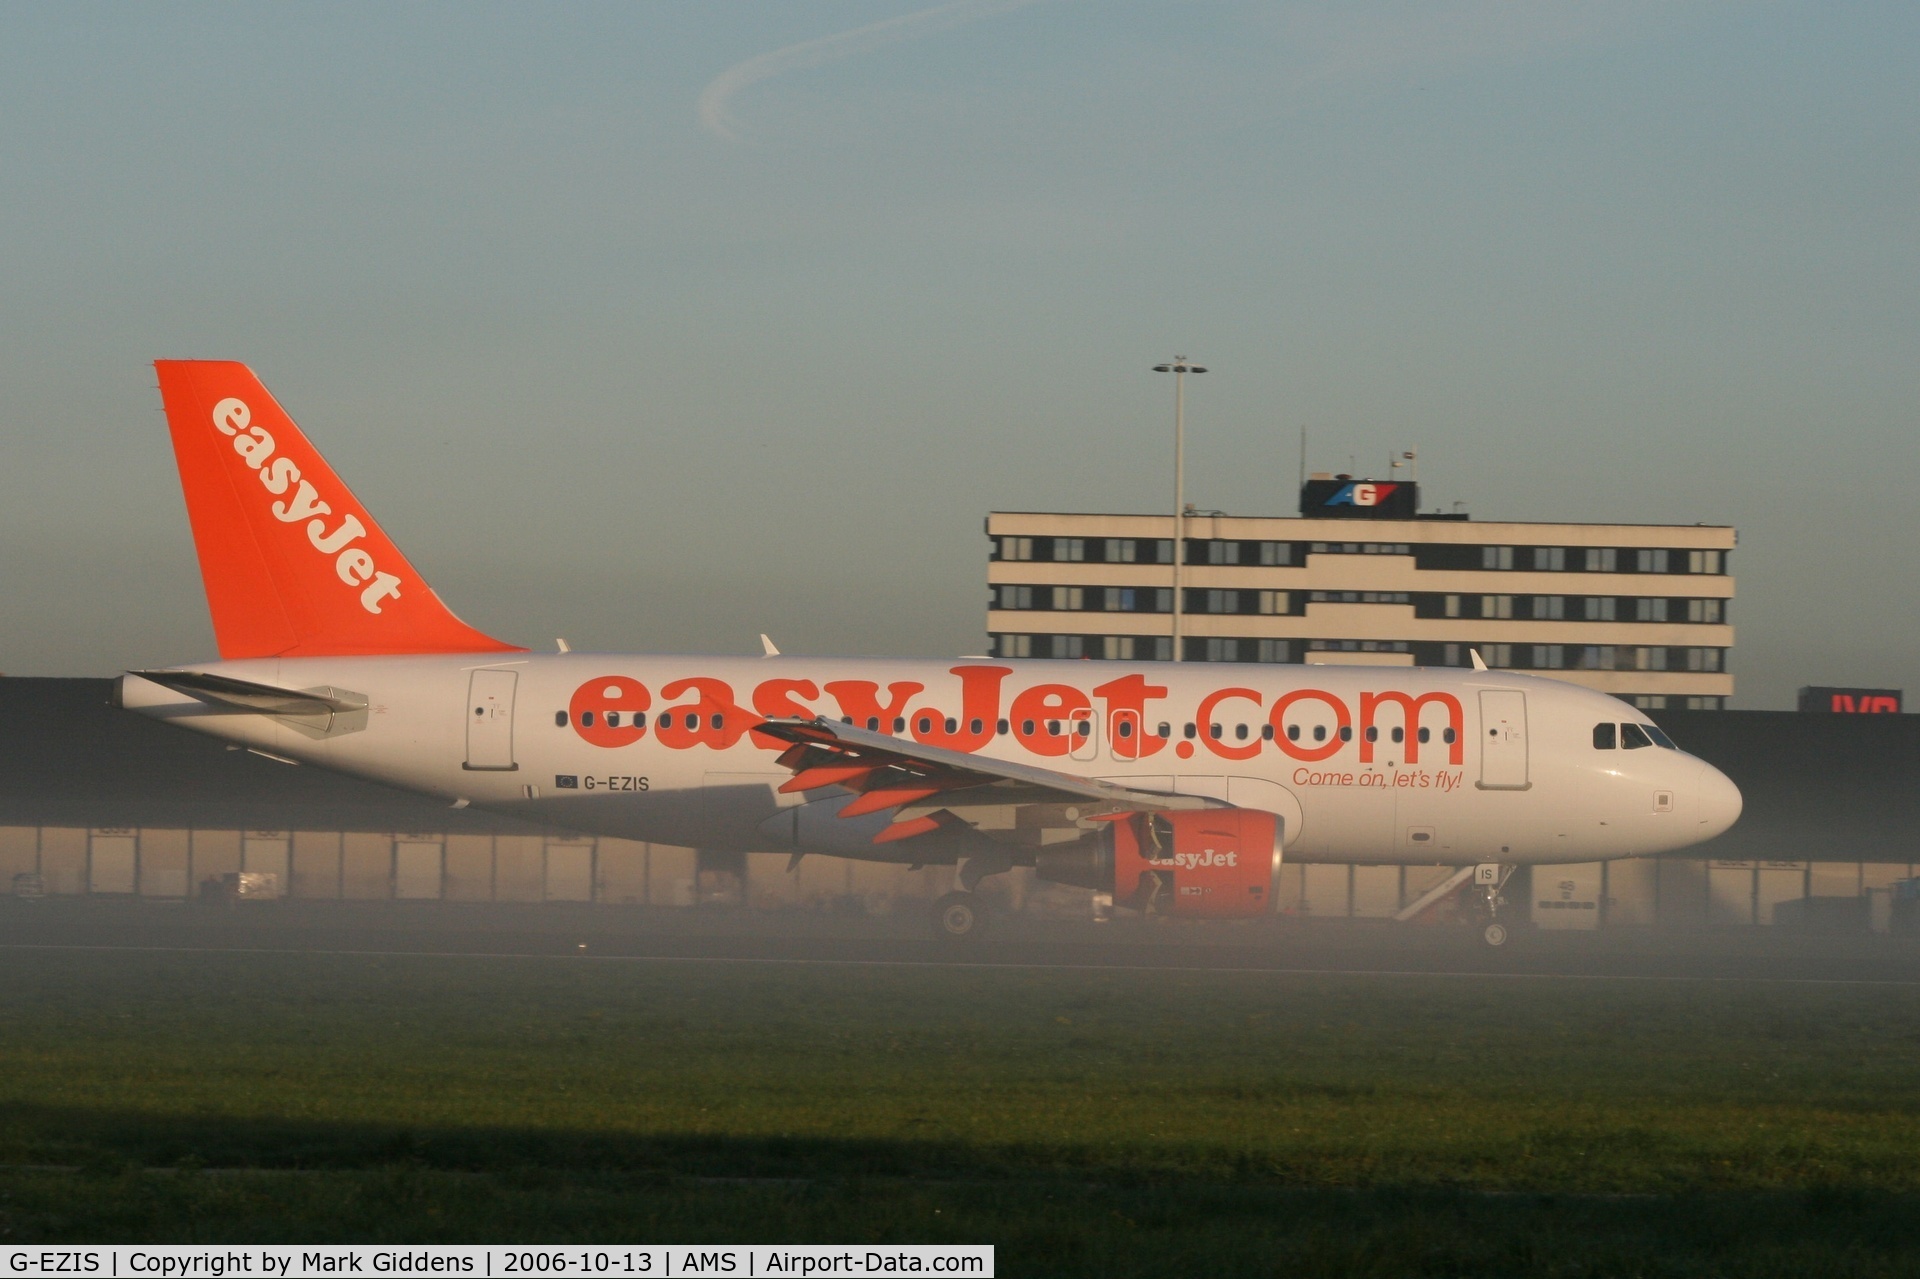 G-EZIS, 2005 Airbus A319-111 C/N 2528, Easyjet A319 in early morning ground mist